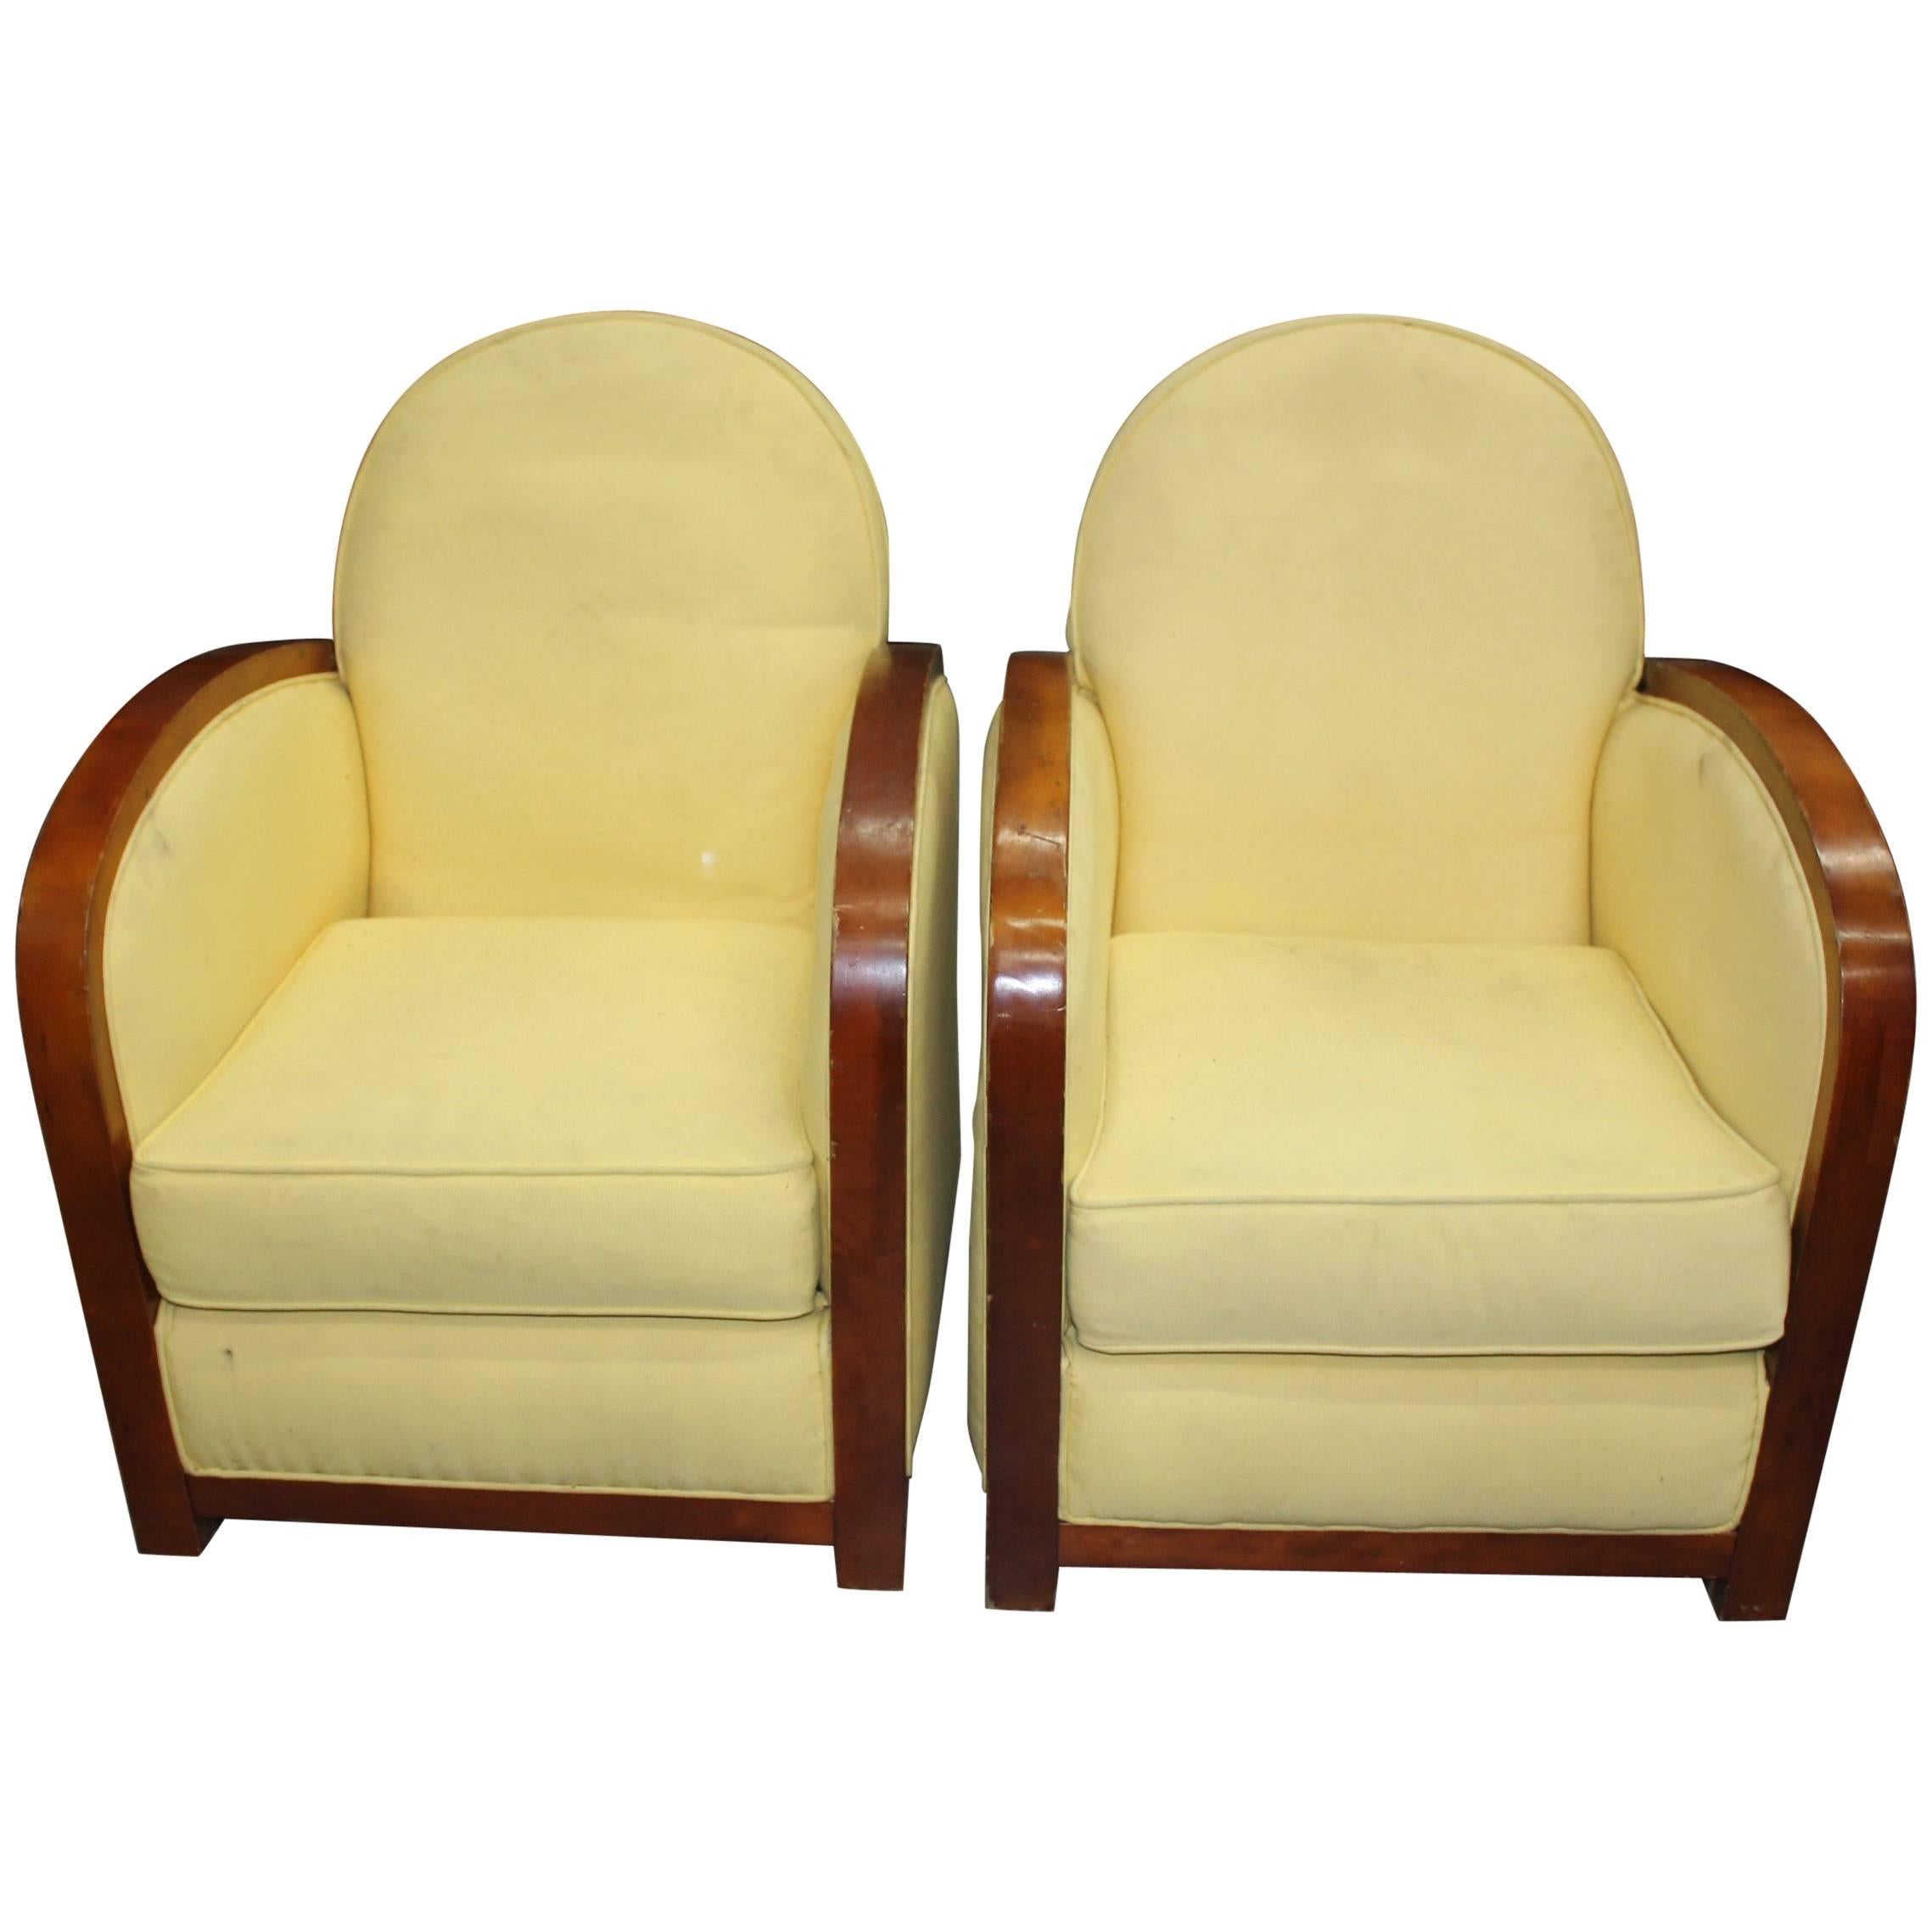 Fine Pair of French Art Deco Speed Armchairs or Club Chairs, circa 1940s